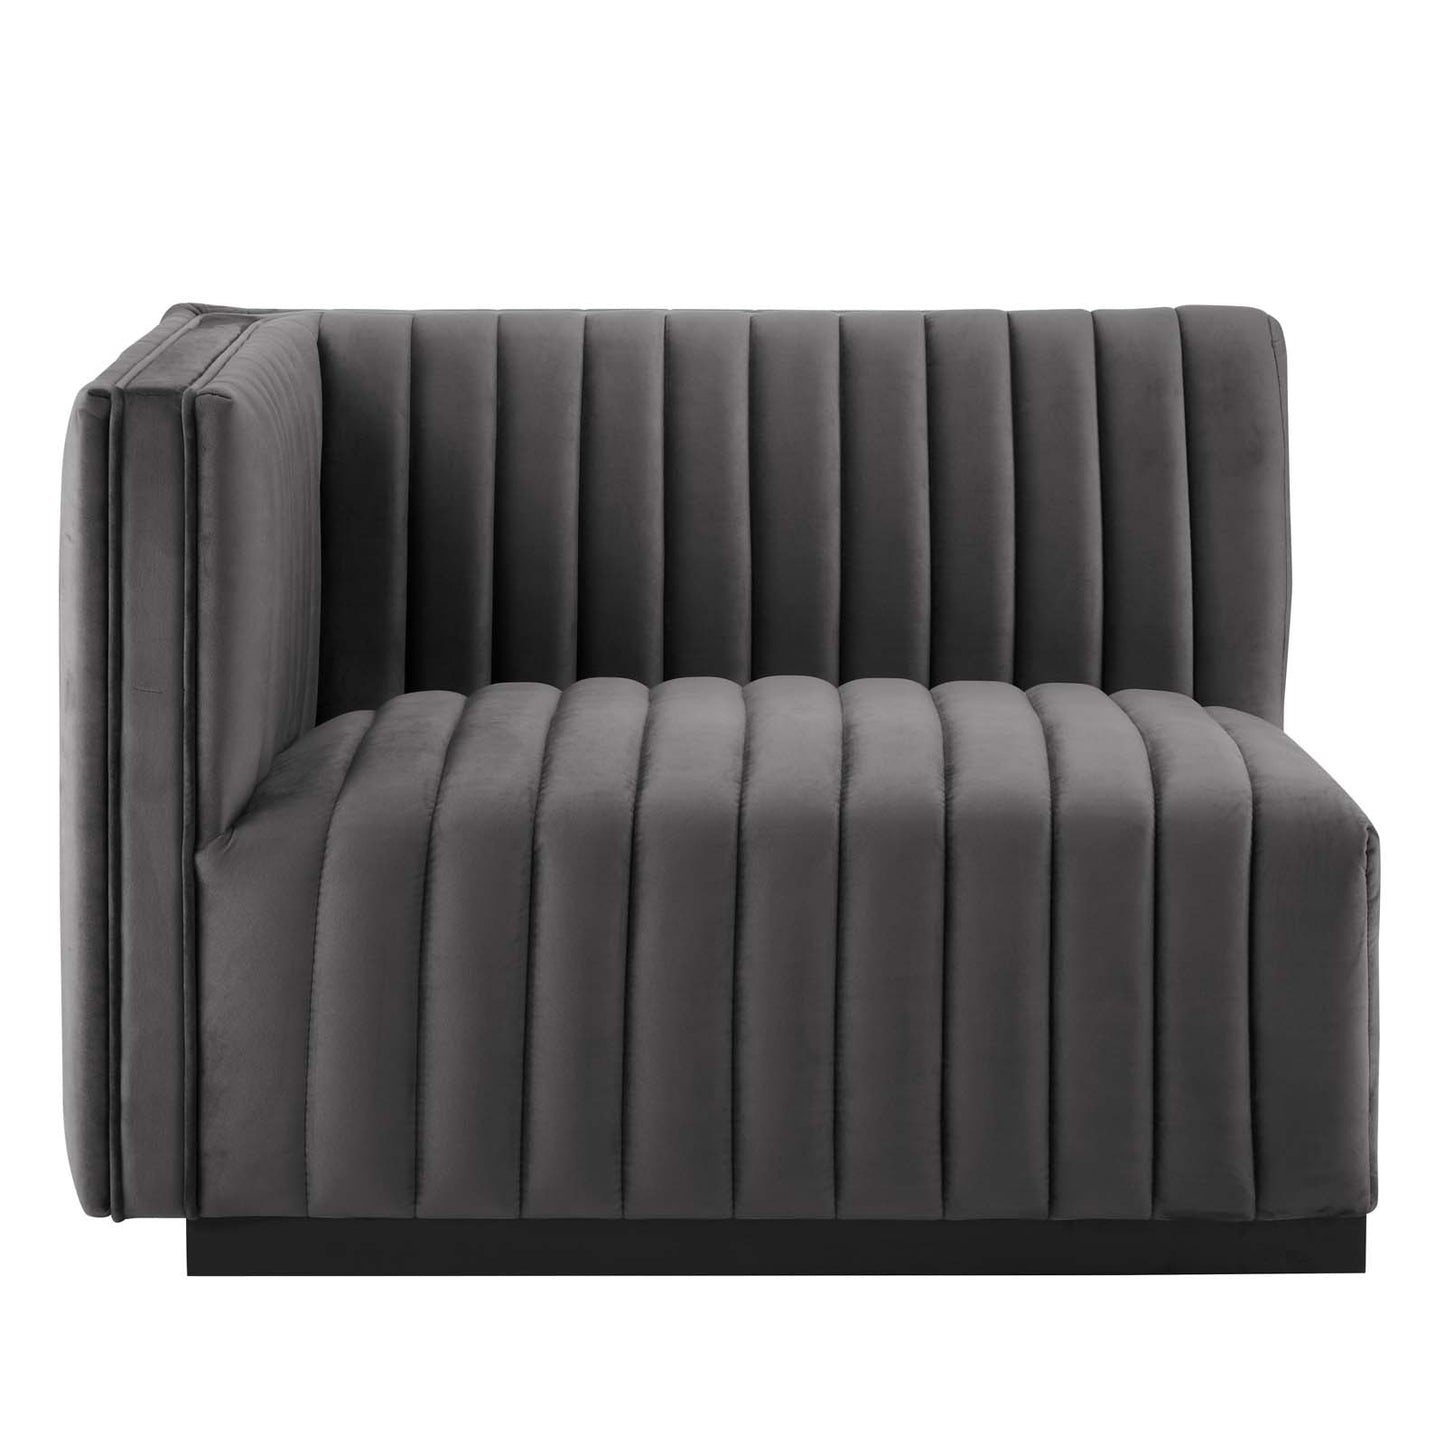 Conjure Channel Tufted Performance Velvet Sofa Black Gray EEI-5765-BLK-GRY